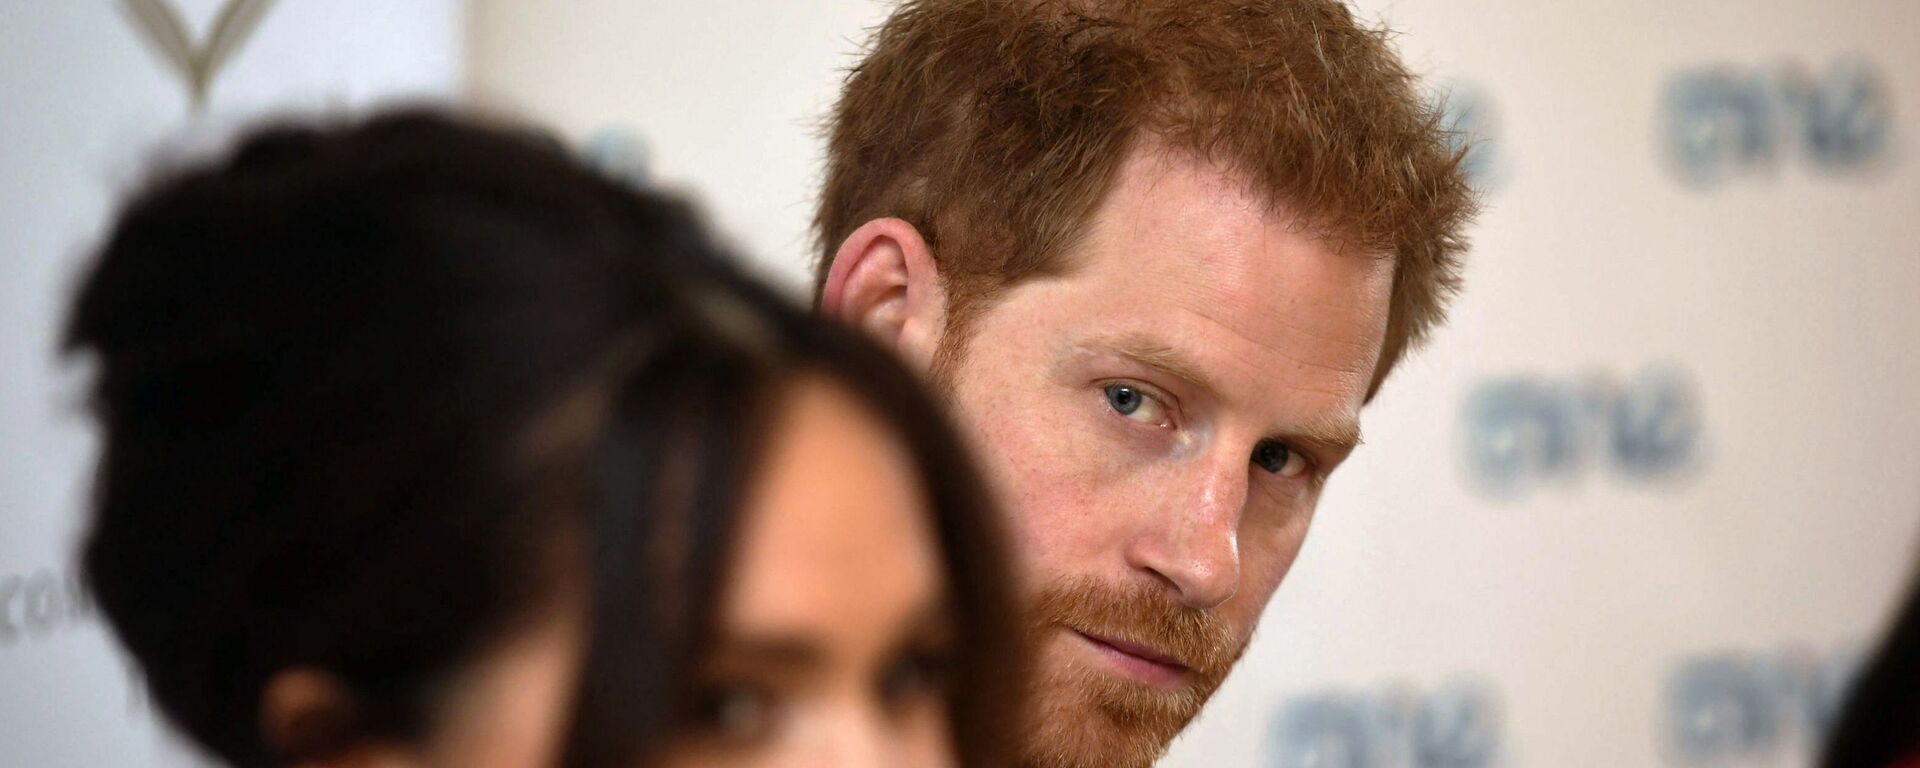 Britain's Prince Harry and Meghan Duchess of Sussex attend a roundtable discussion on gender equality at Windsor Castle in Windsor, England, Friday Oct. 25, 2019. - Sputnik International, 1920, 19.02.2021